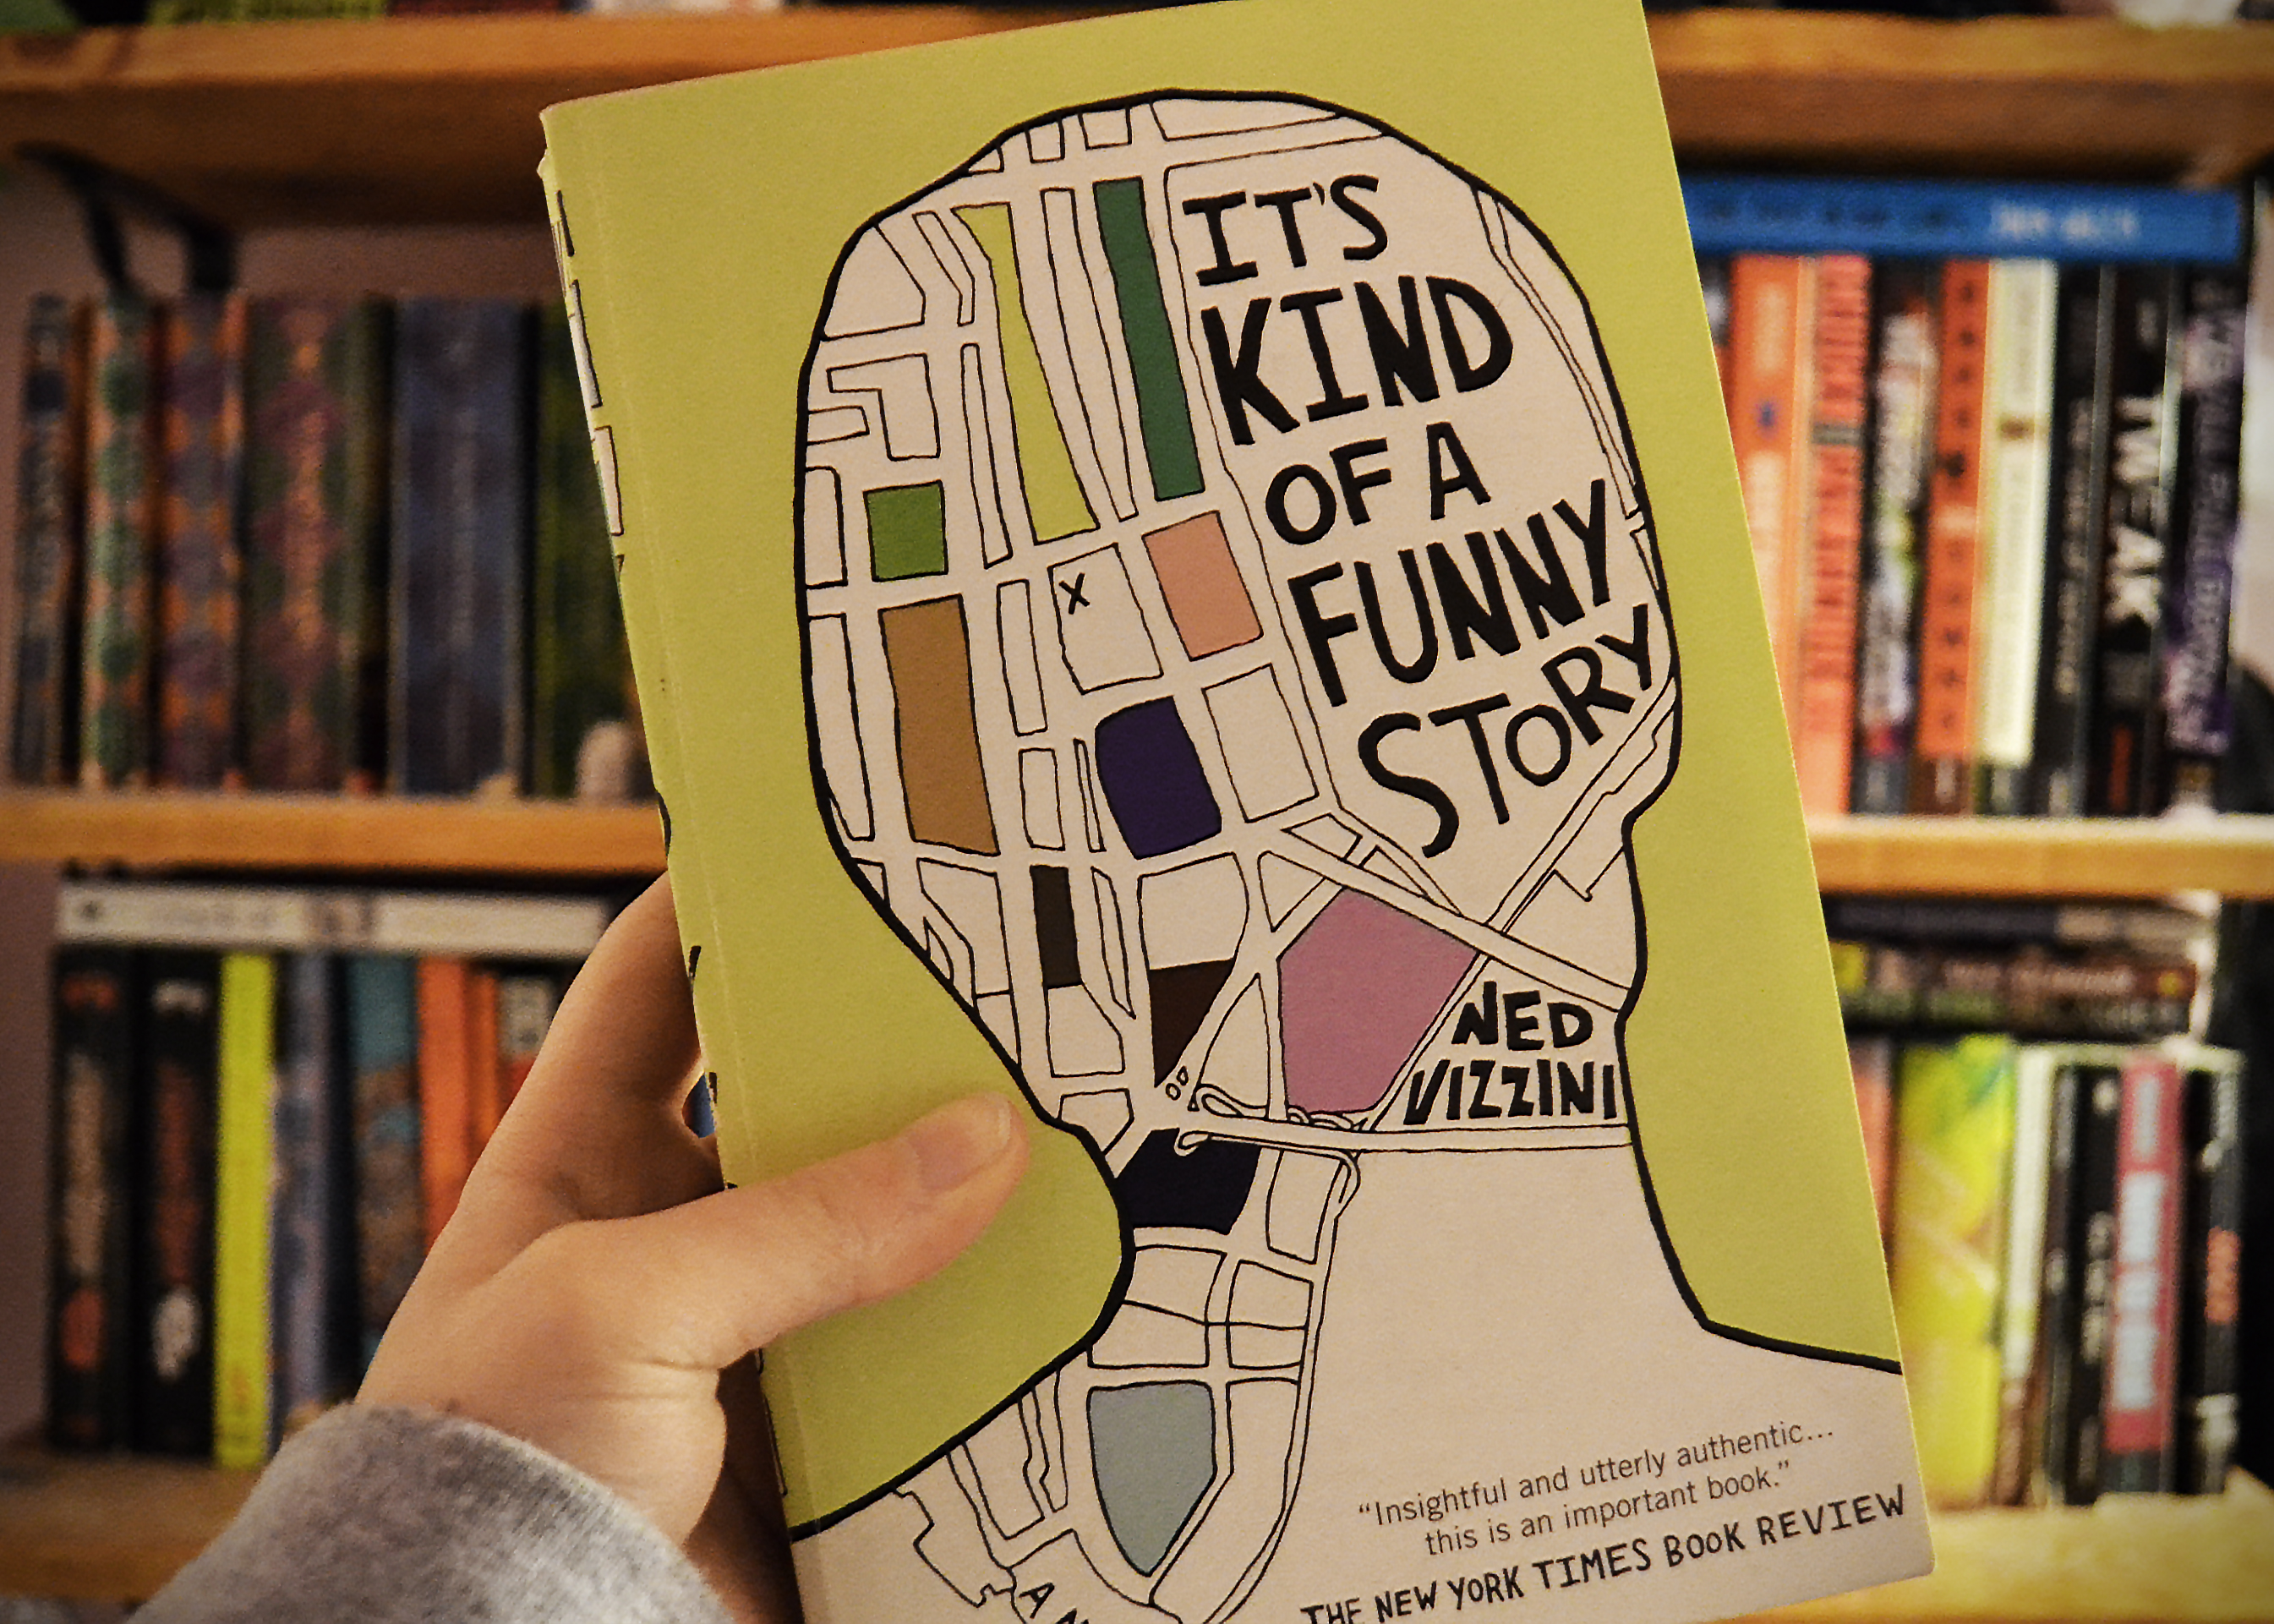 It's Kind Of A Funny Story by Ned Vizzini